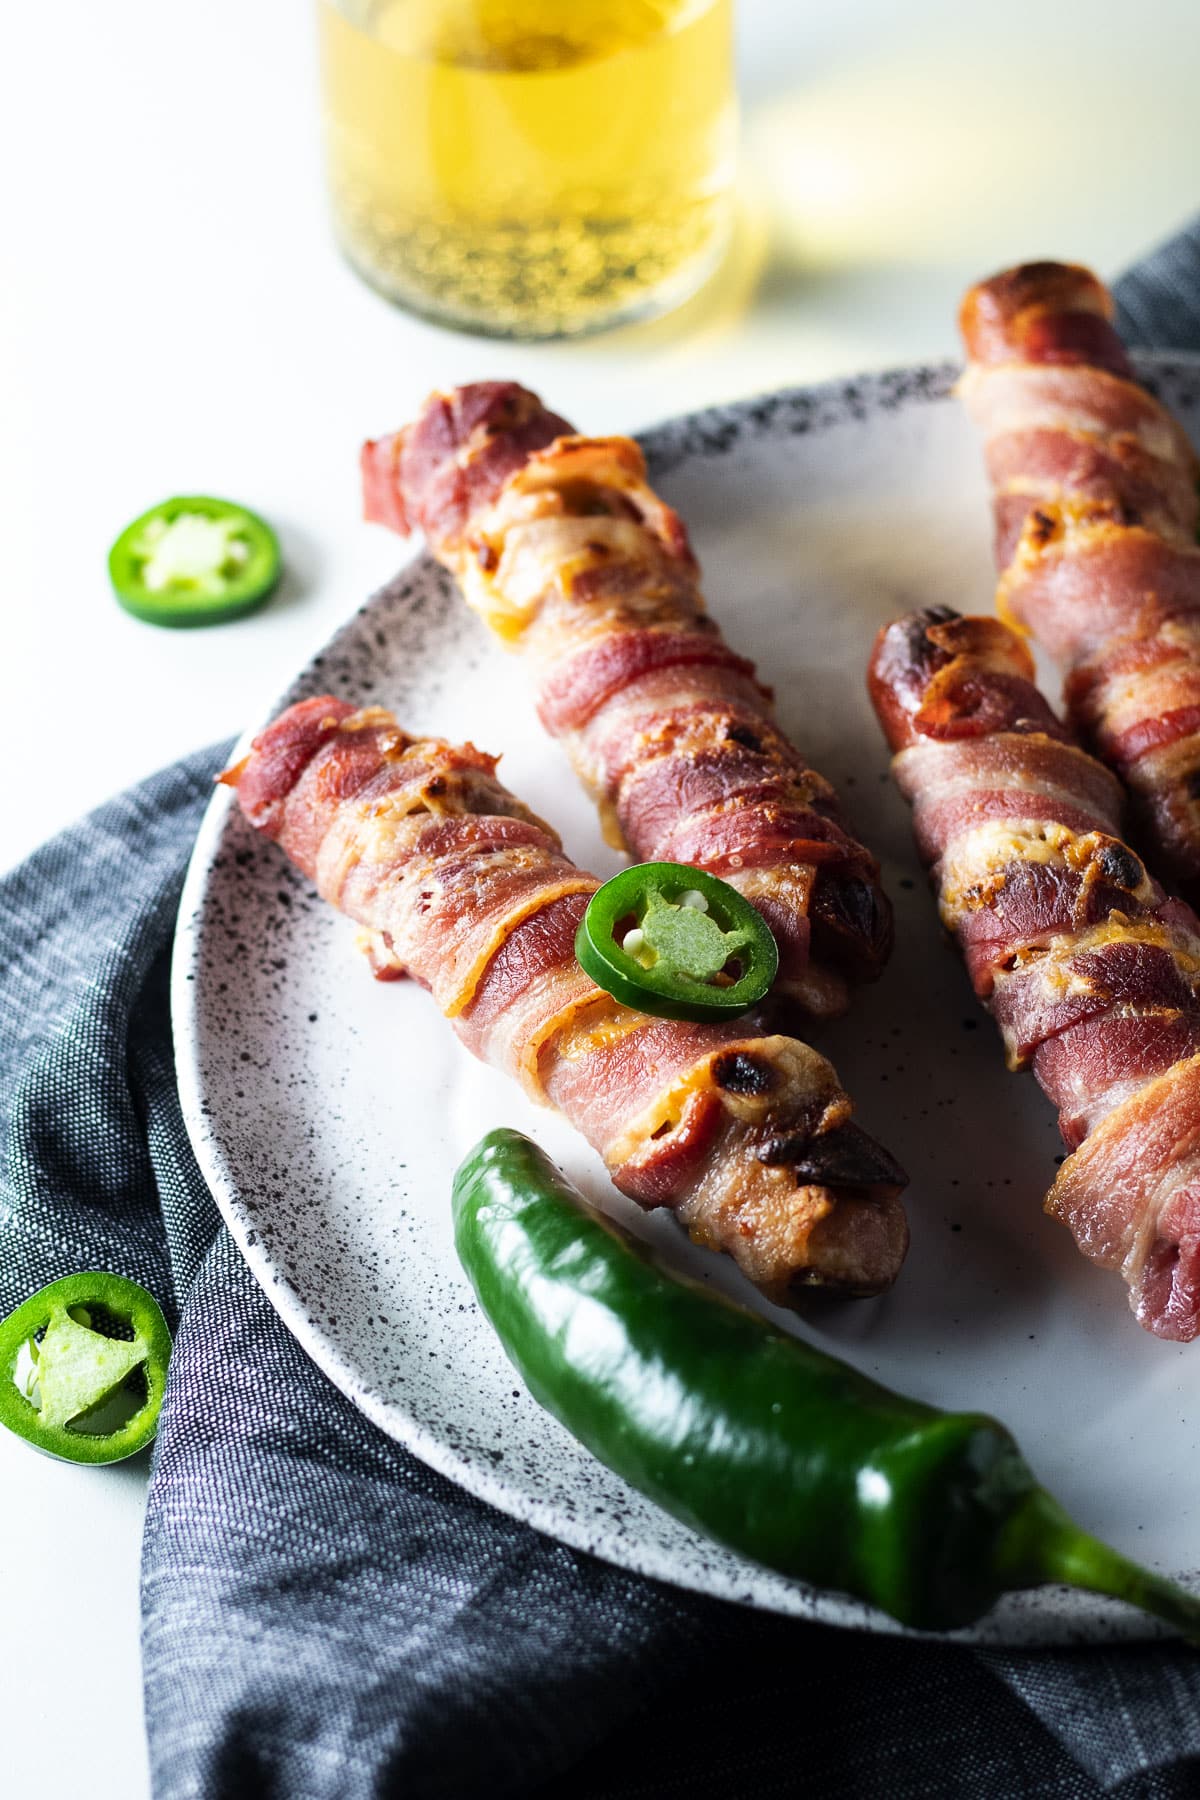 Bacon wrapped jalapeno popper hot dogs on a white speckled plate.